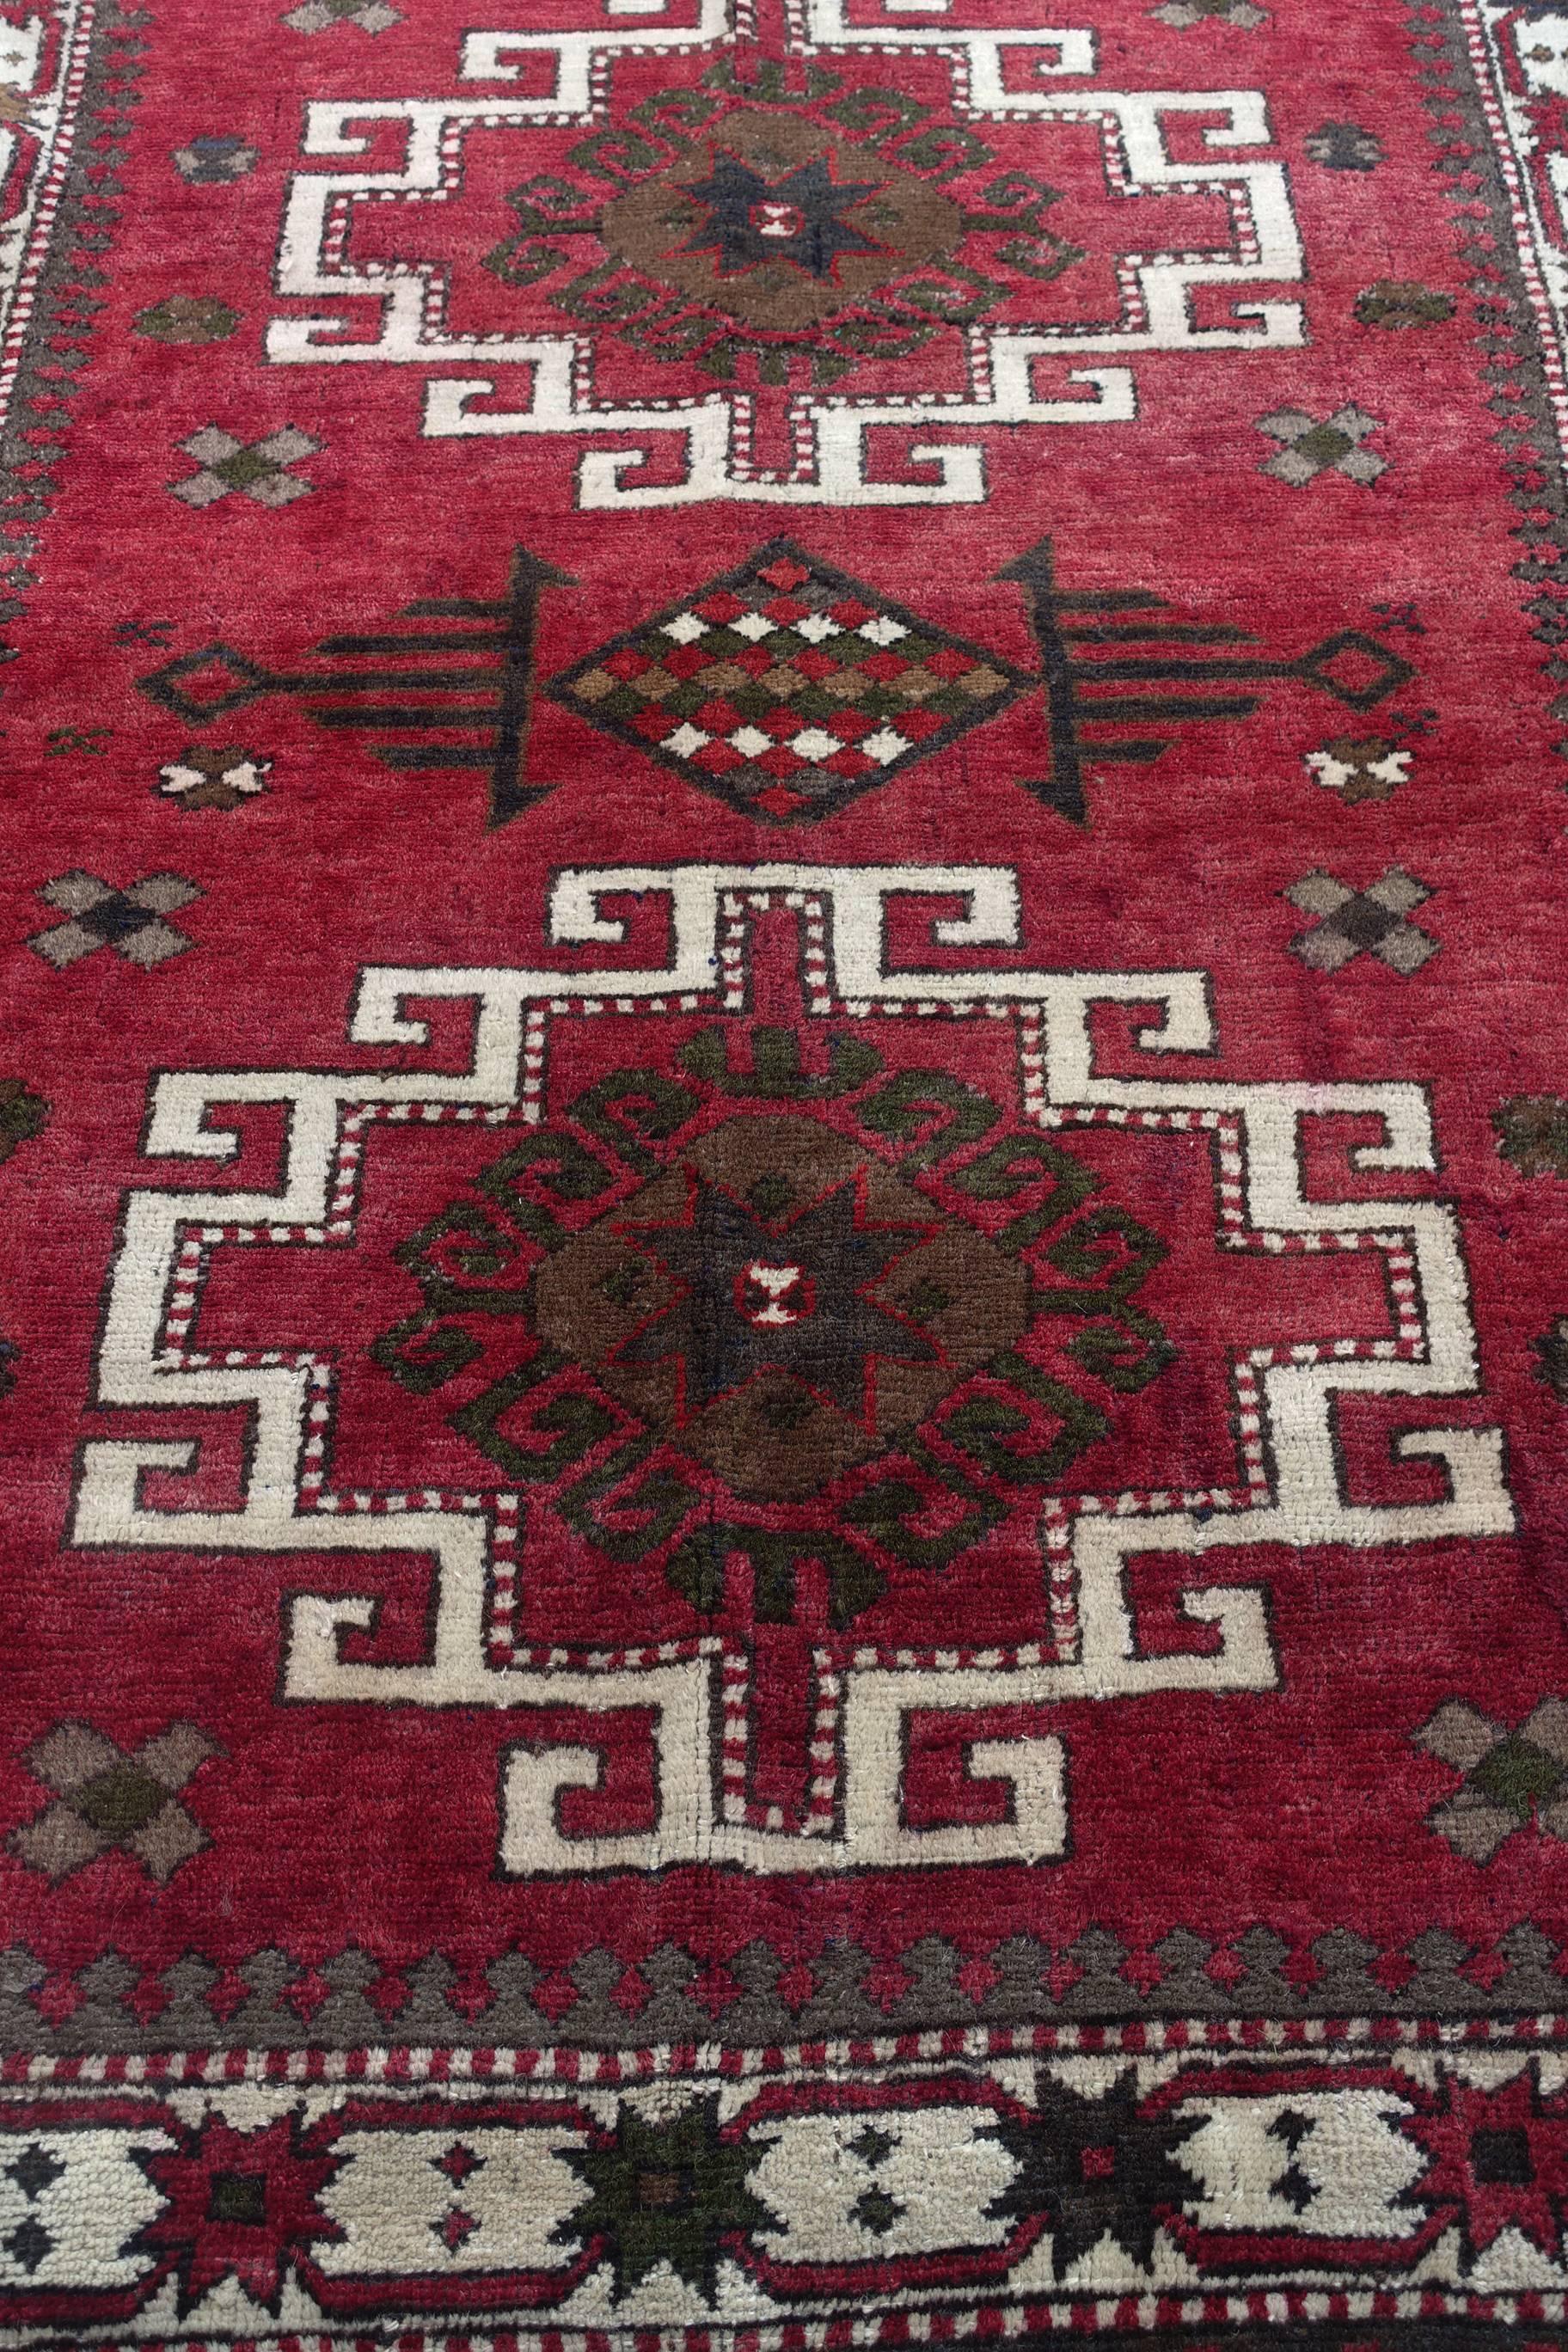 This is an all-wool Turkish Kazakh rug from Eastern Turkey (Kars) in deep burgundy color c. 179 x 141cm or 5.9 by 4.6 feet.
 